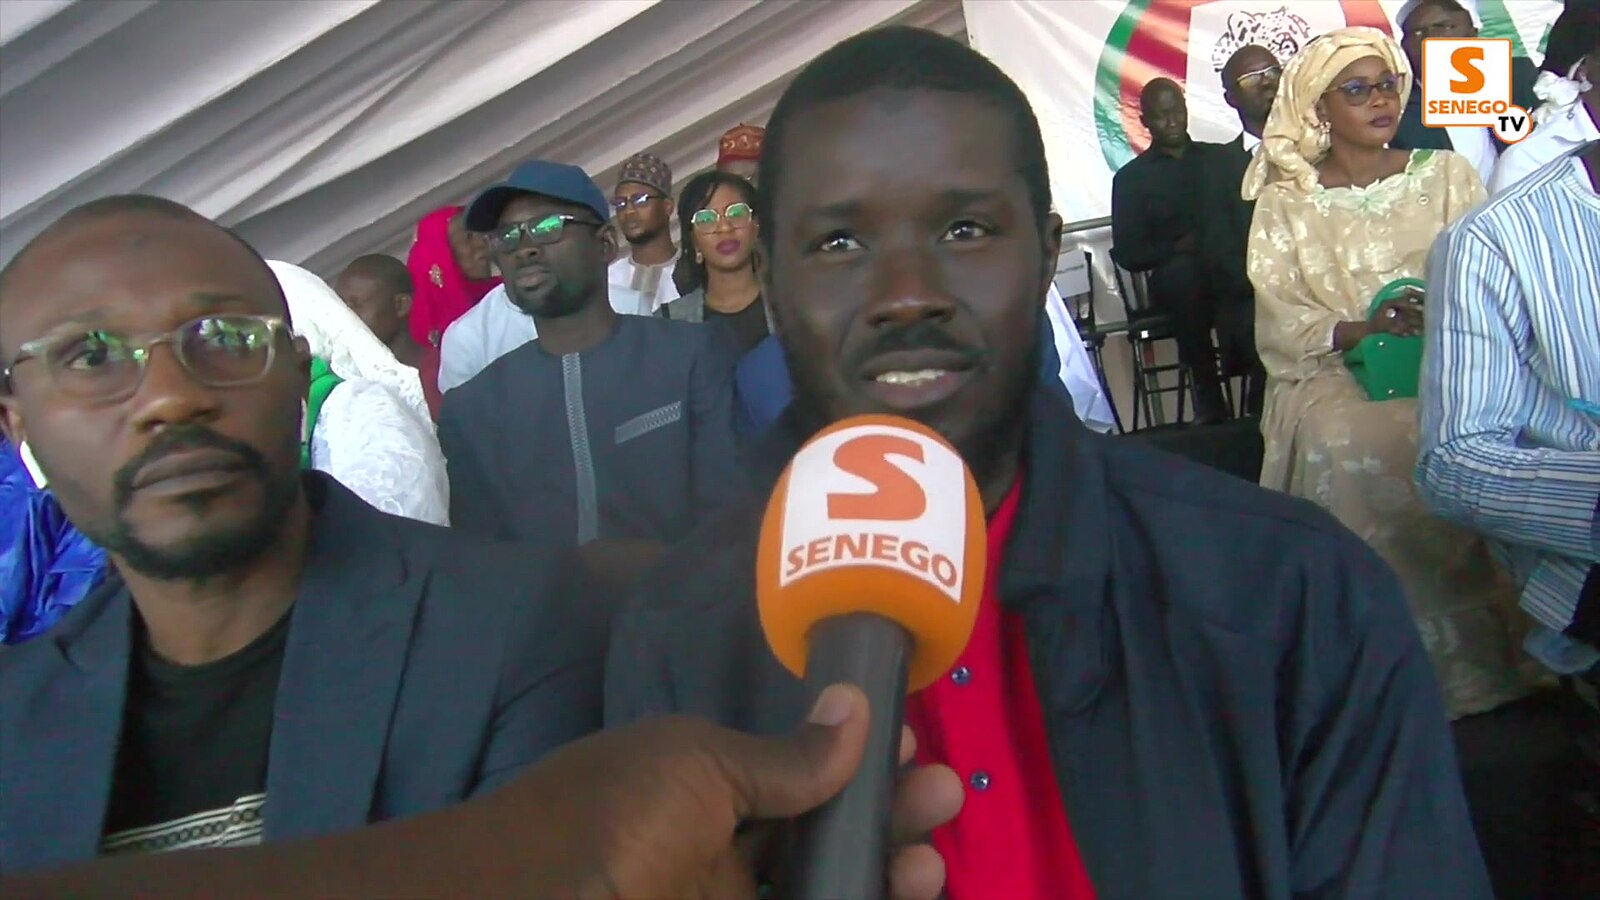 Bassirou Diomaye Faye speakiing into an orange mircrophone during a press conference with Senego TV.